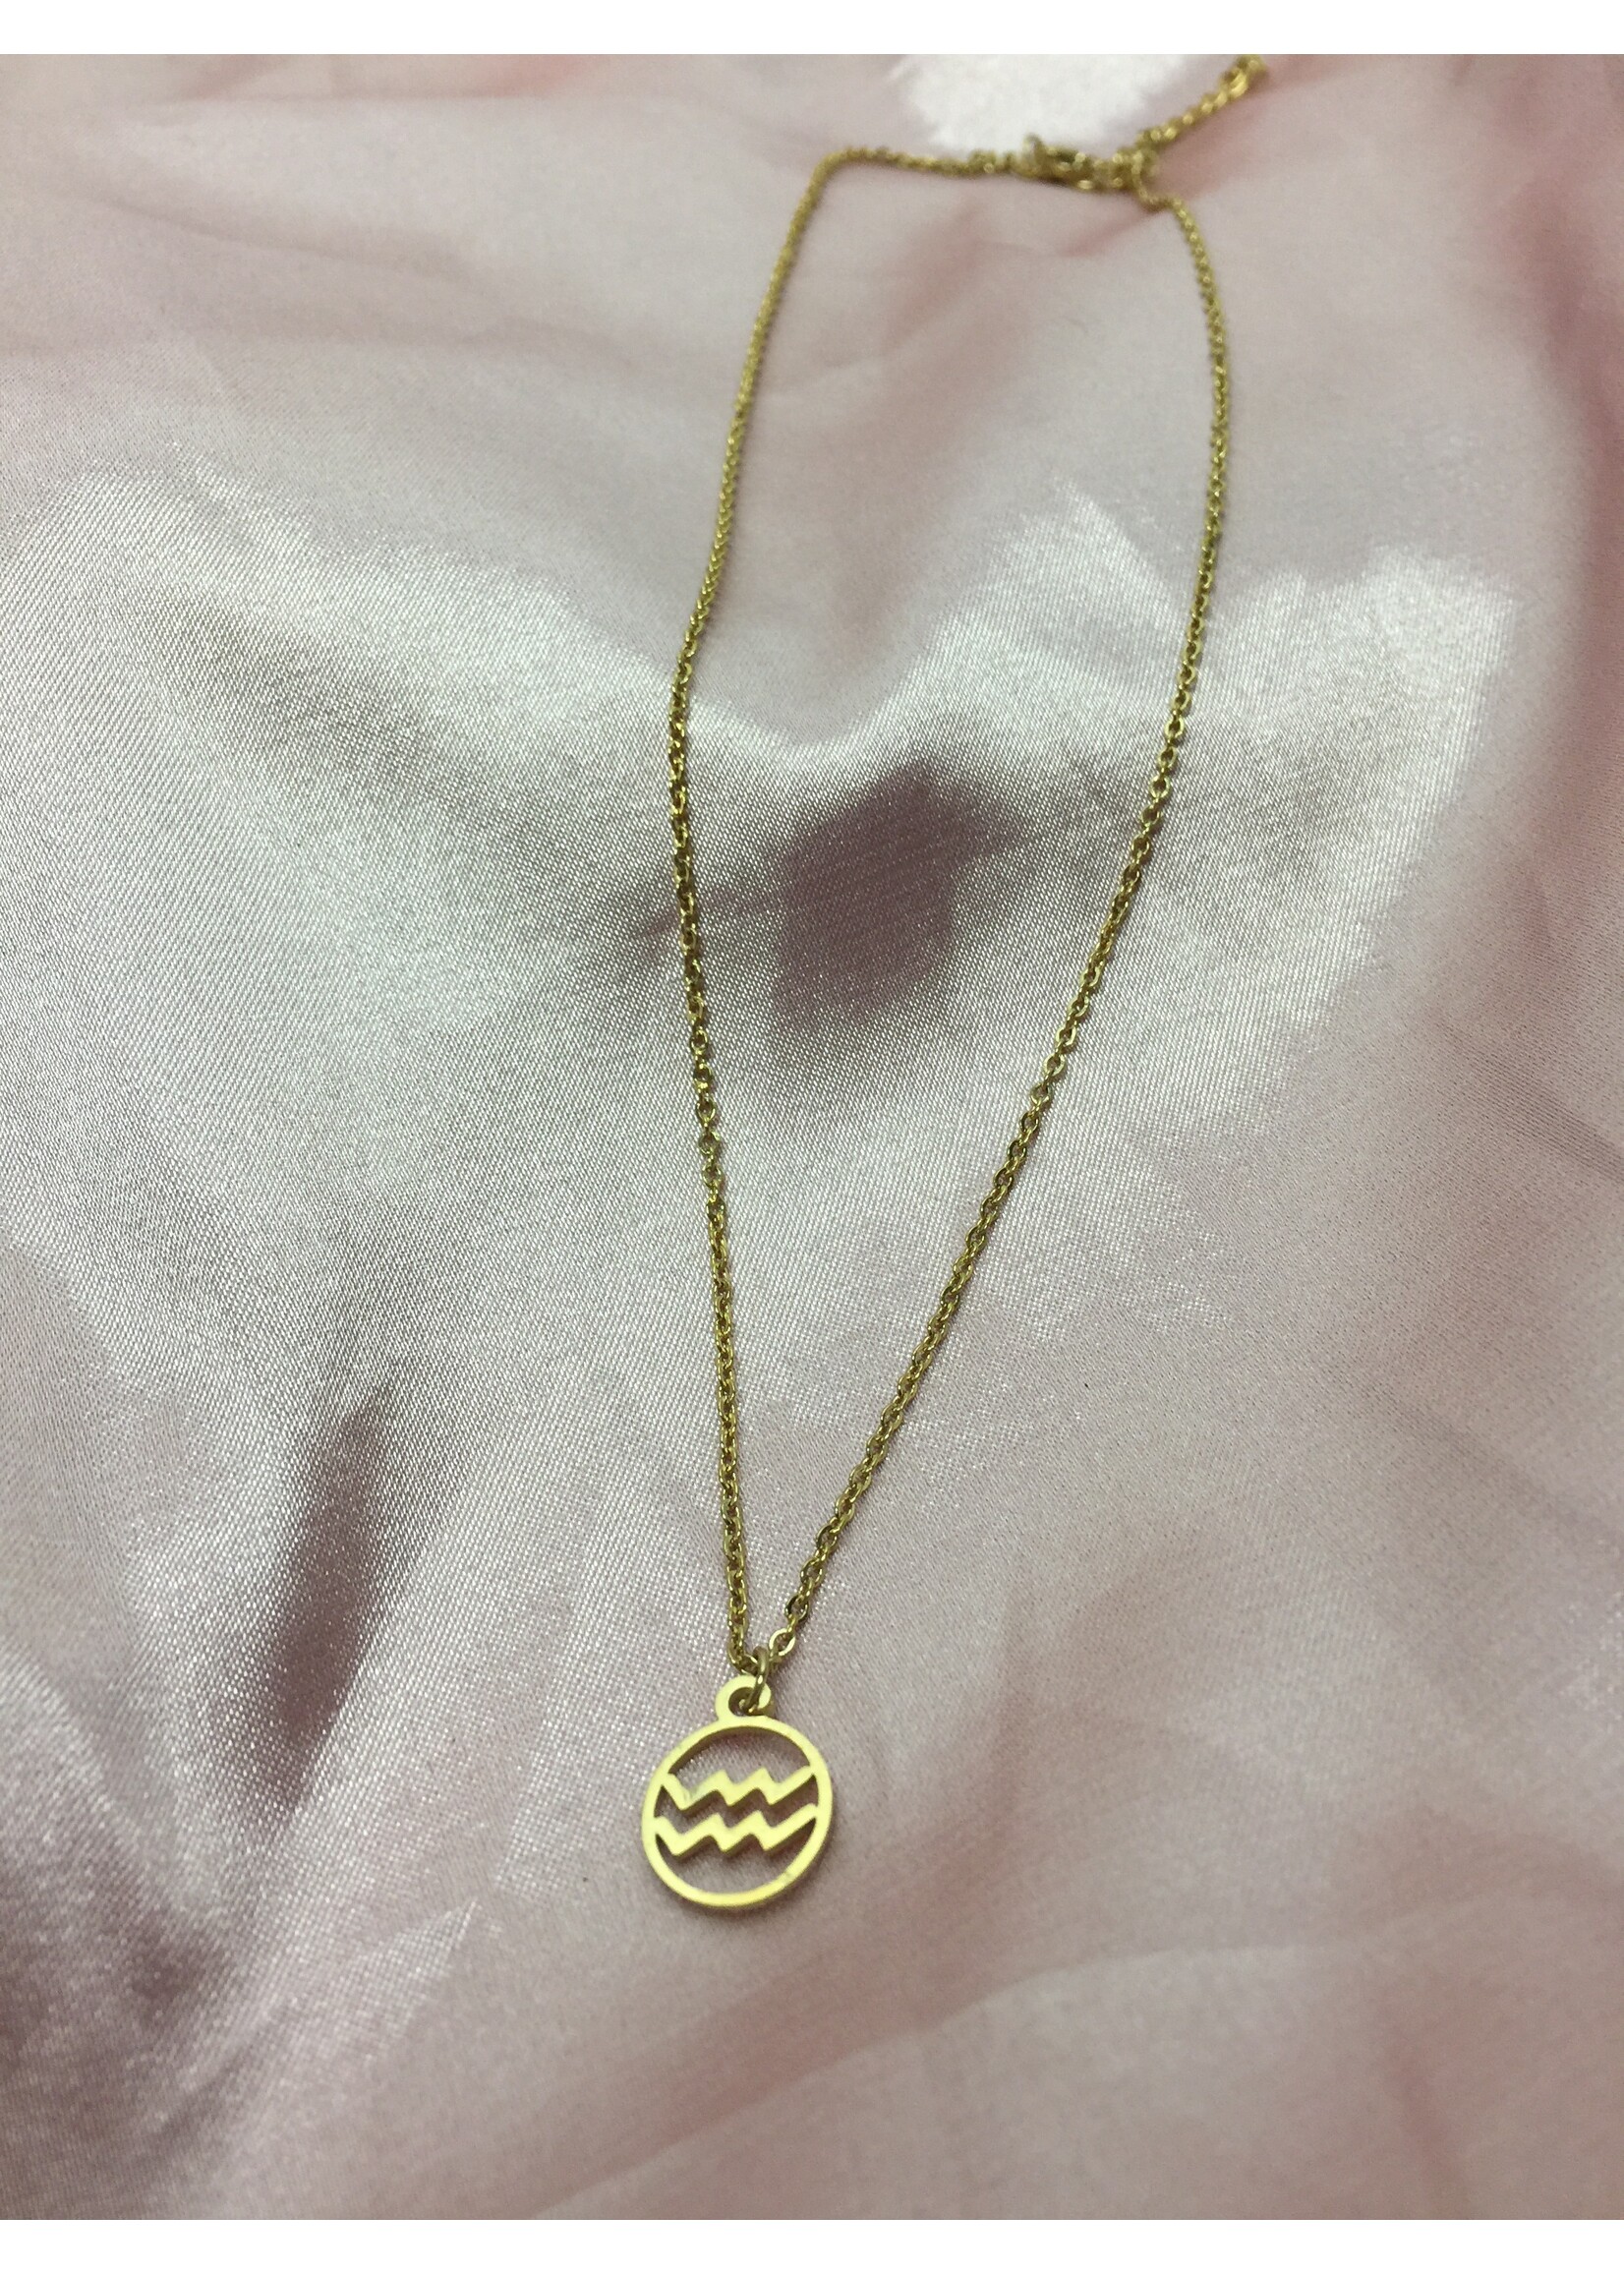 YOU ARE SPECIAL "Little Circle Horoscope" Gold Necklace